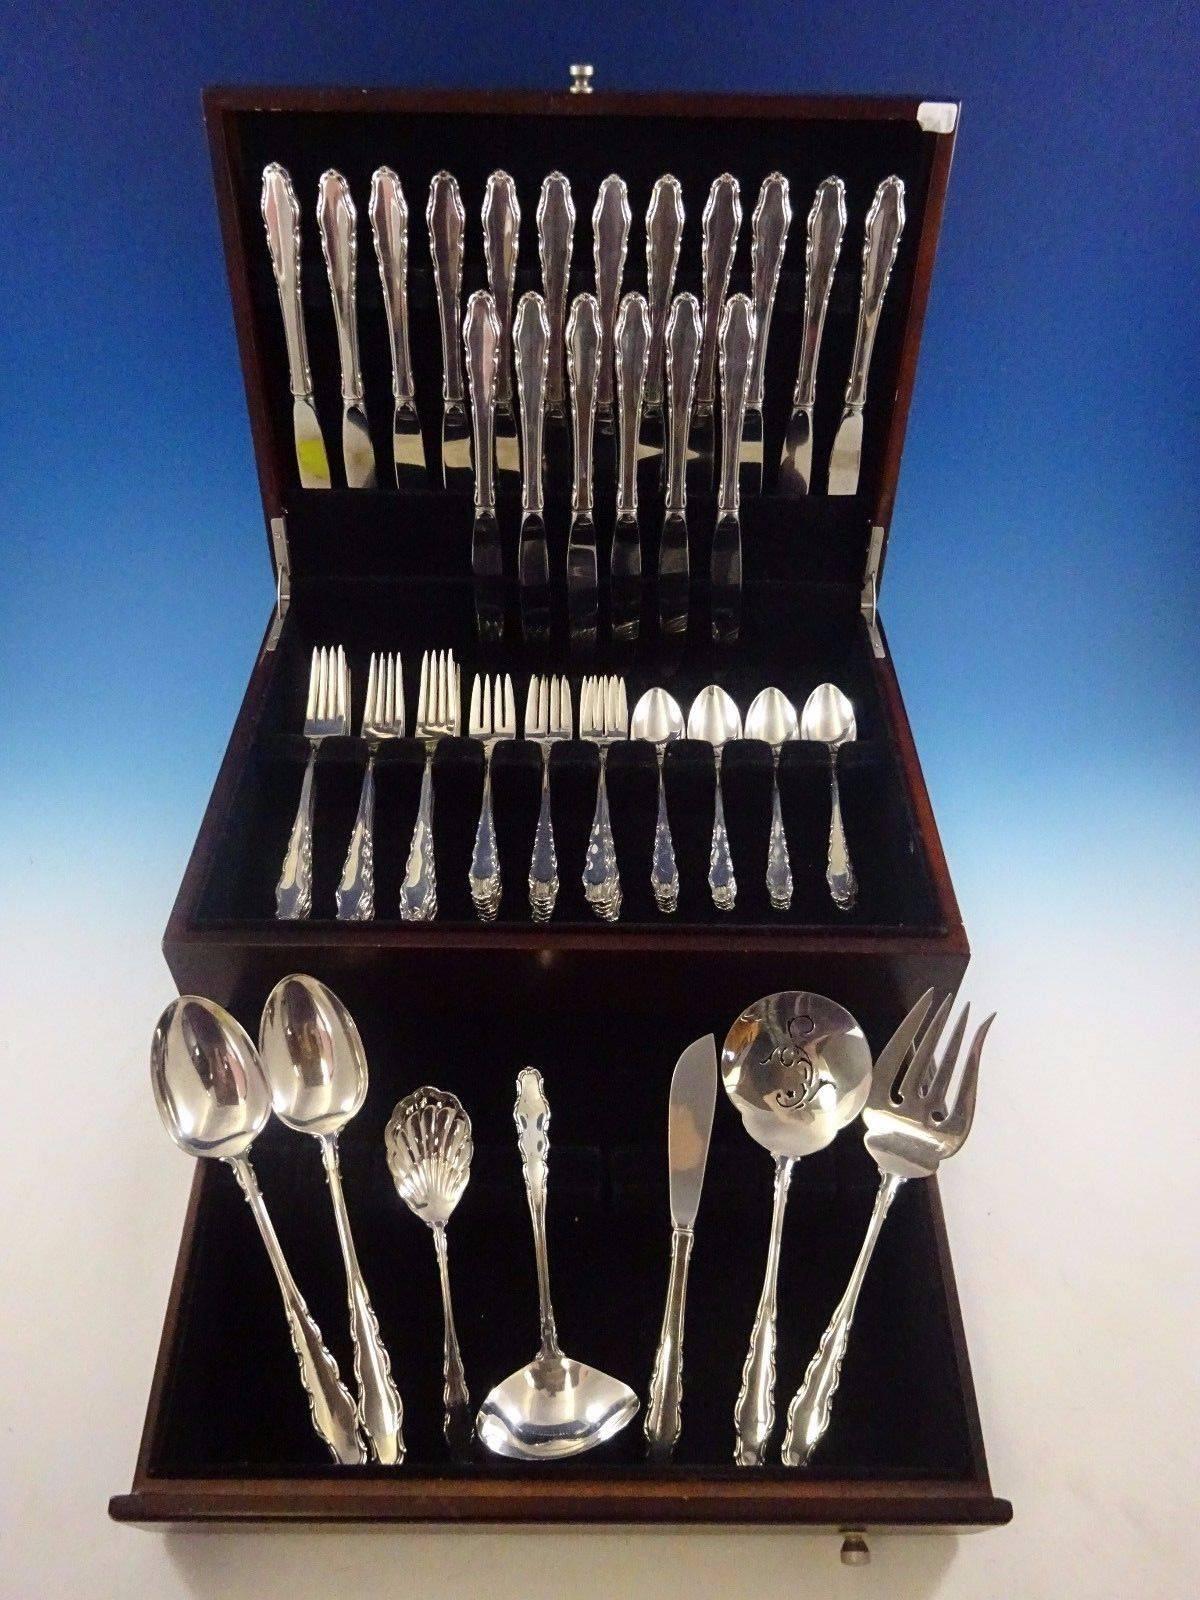 English Provincial by Reed & Barton sterling silver flatware set - 79 pieces. 

This set includes:

18 knives, 9 1/8